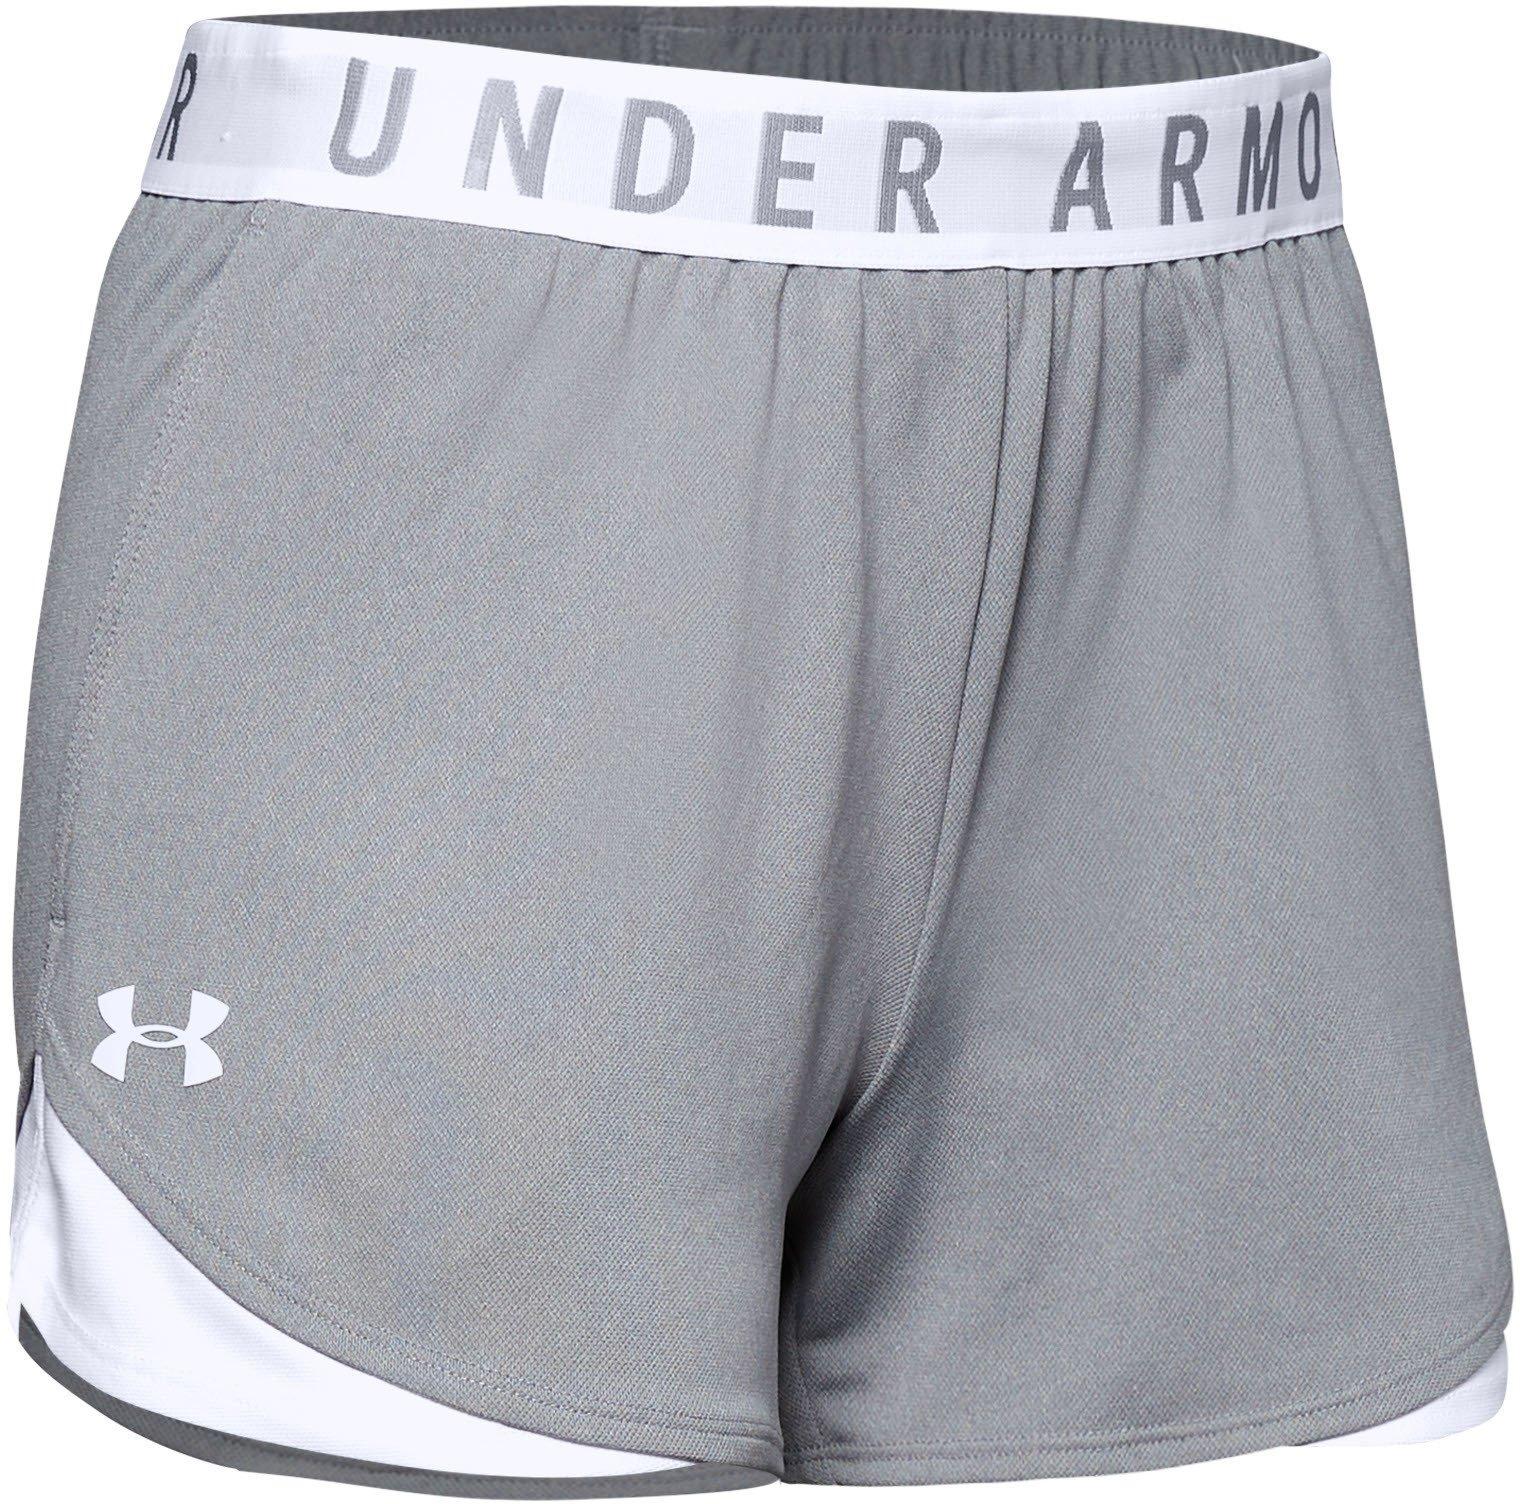 Under Armour Play Up Shorts 3.0-GRY XS